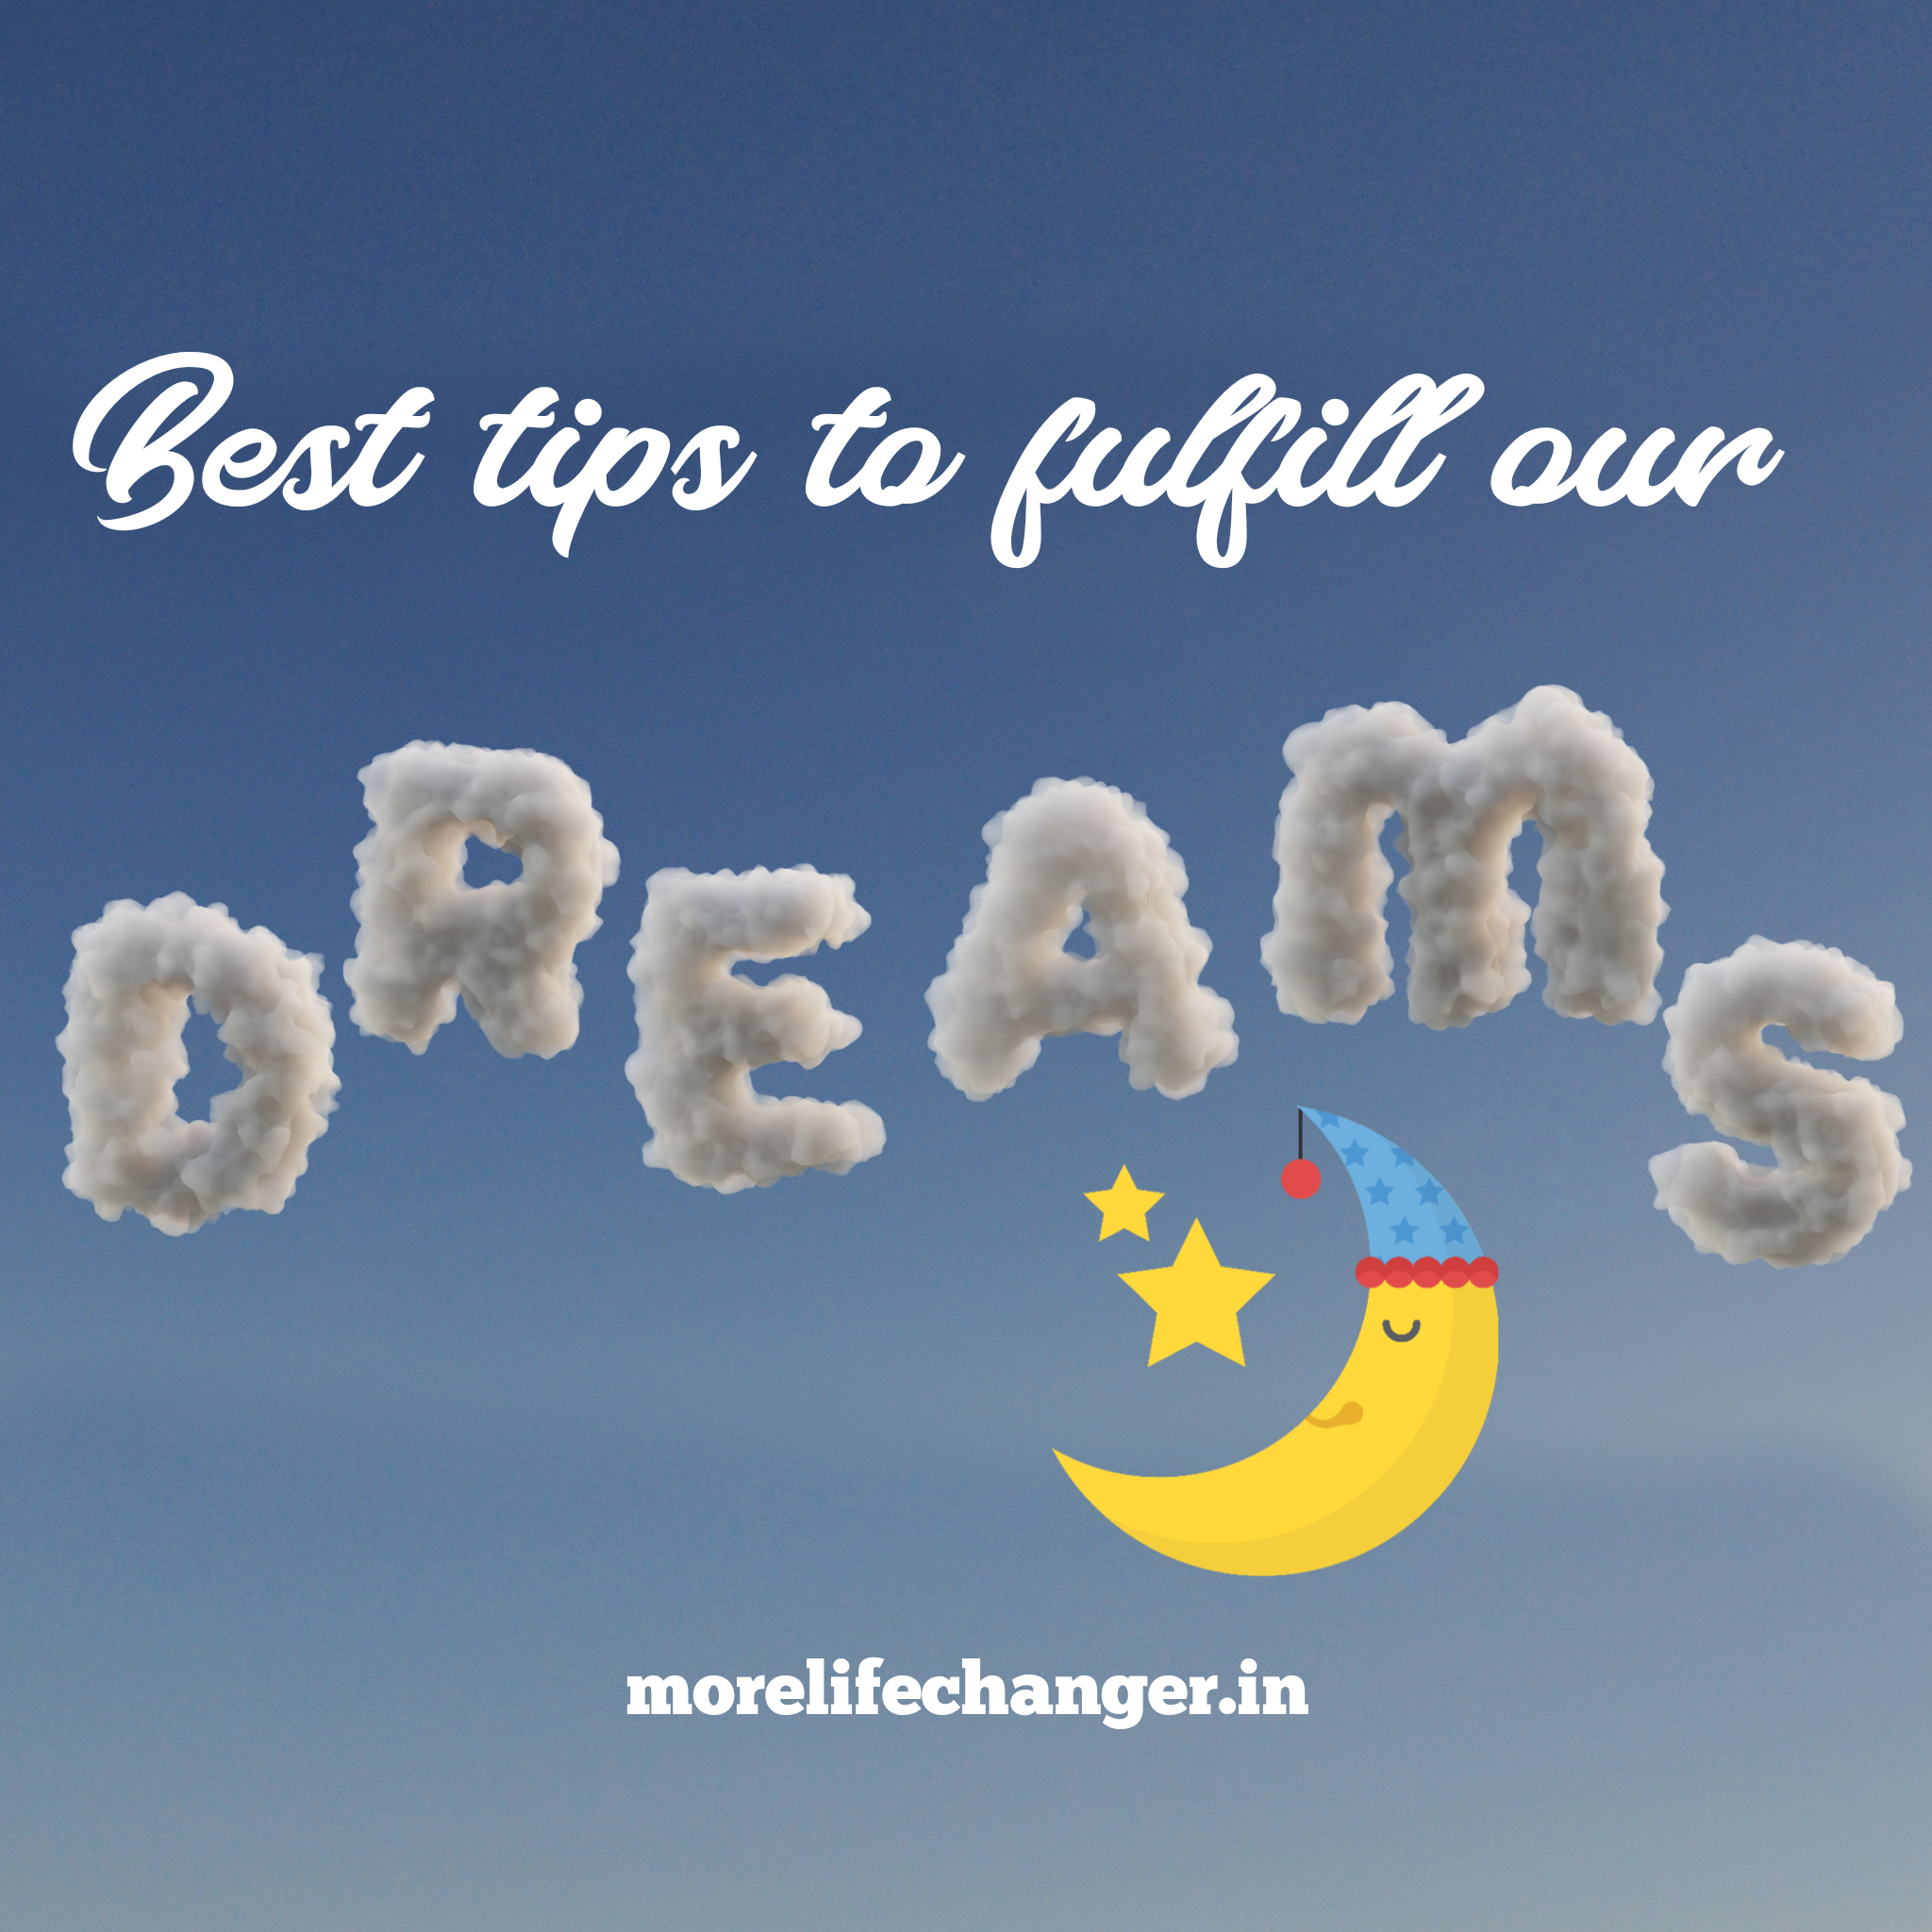 Basics tips to fulfill our dreams